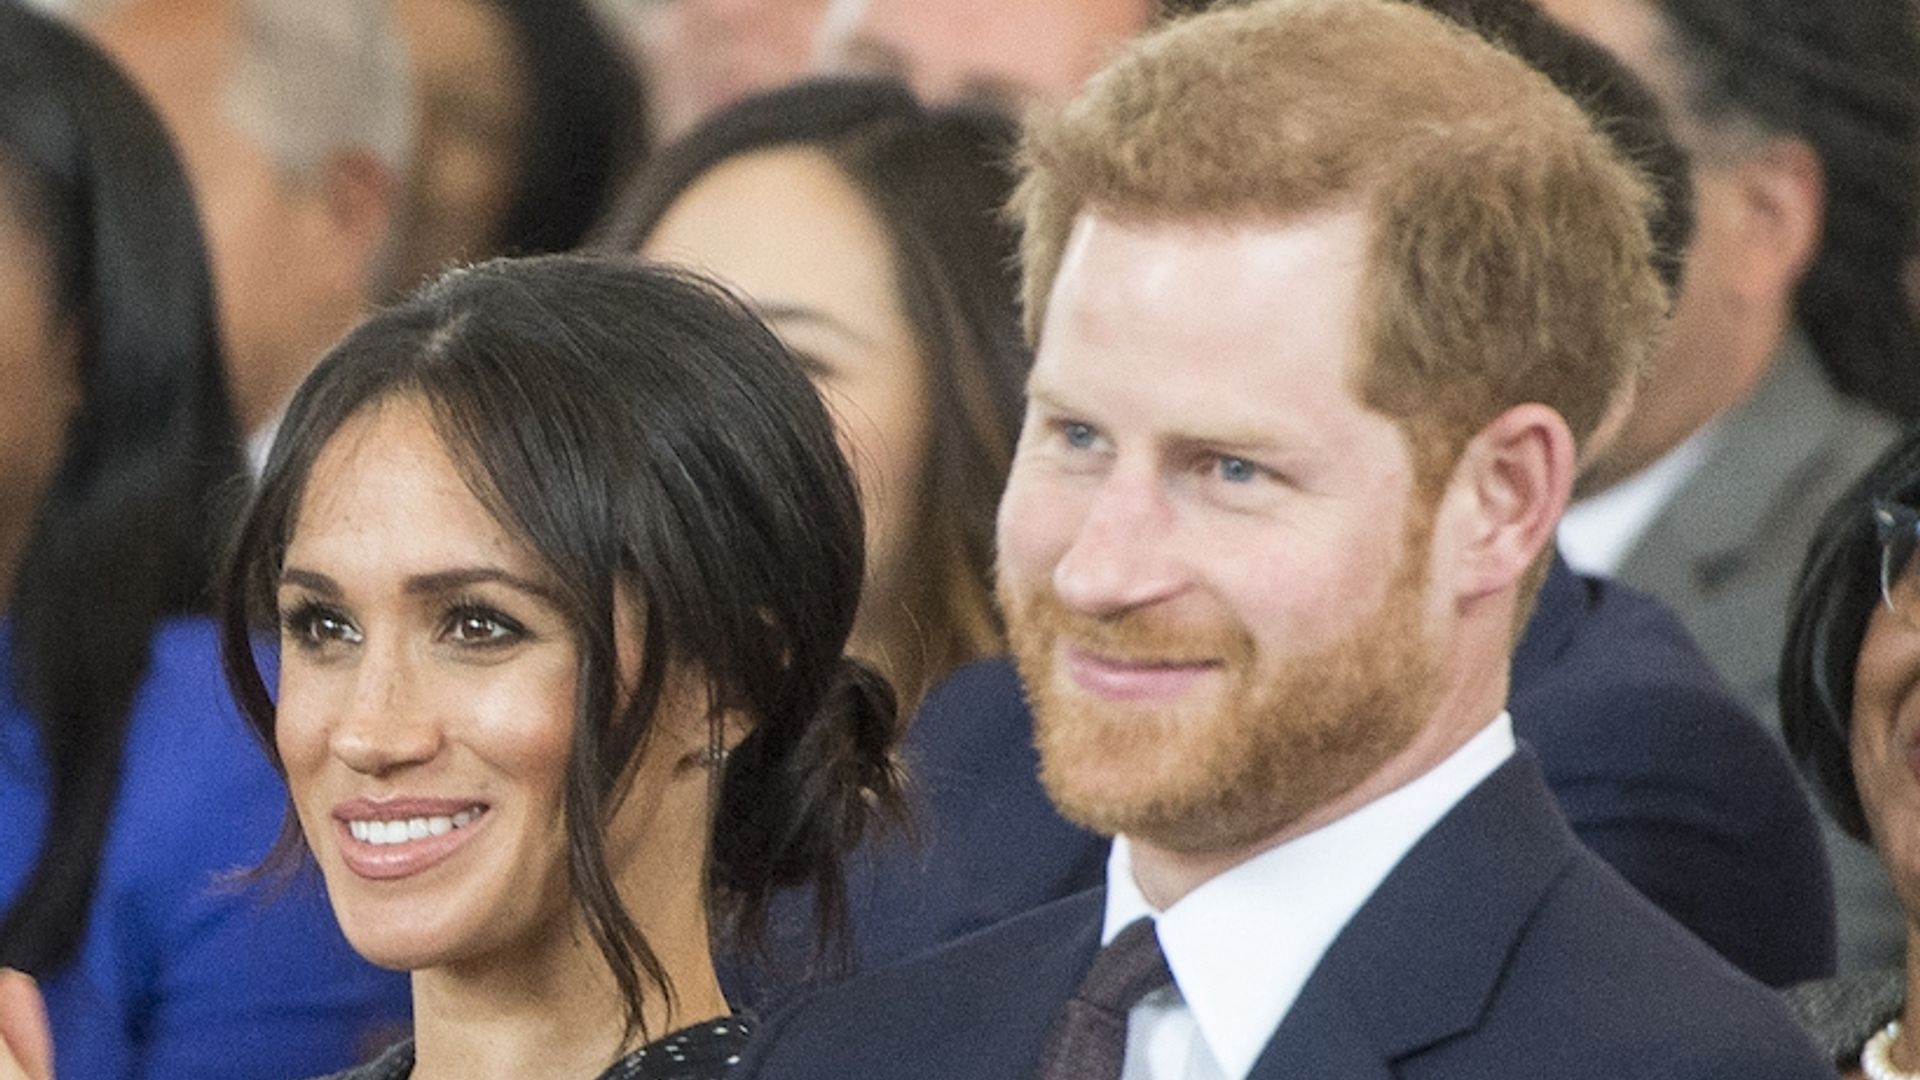 Sorry, Your Majesty! You can now own a coin with Meghan Markle and Prince Harry's faces on it